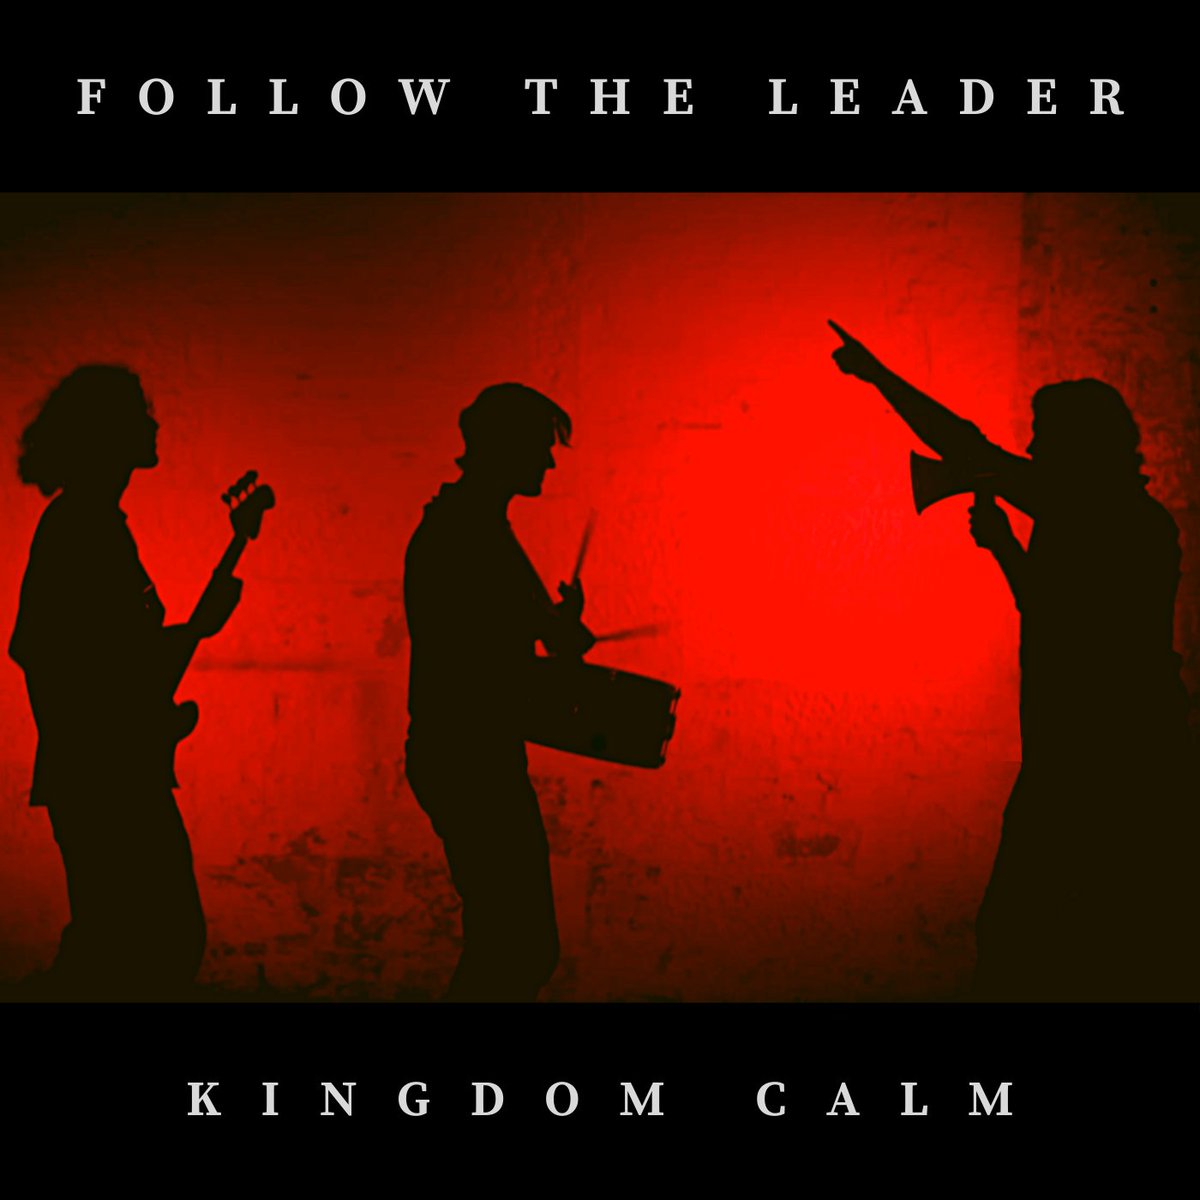 Listen to the single 'Follow The Leader' and enjoy a great new song from the bright and fiery Kingdom Calm. #indiedockmusicblog #indierock indiedockmusicblog.co.uk/?p=23814